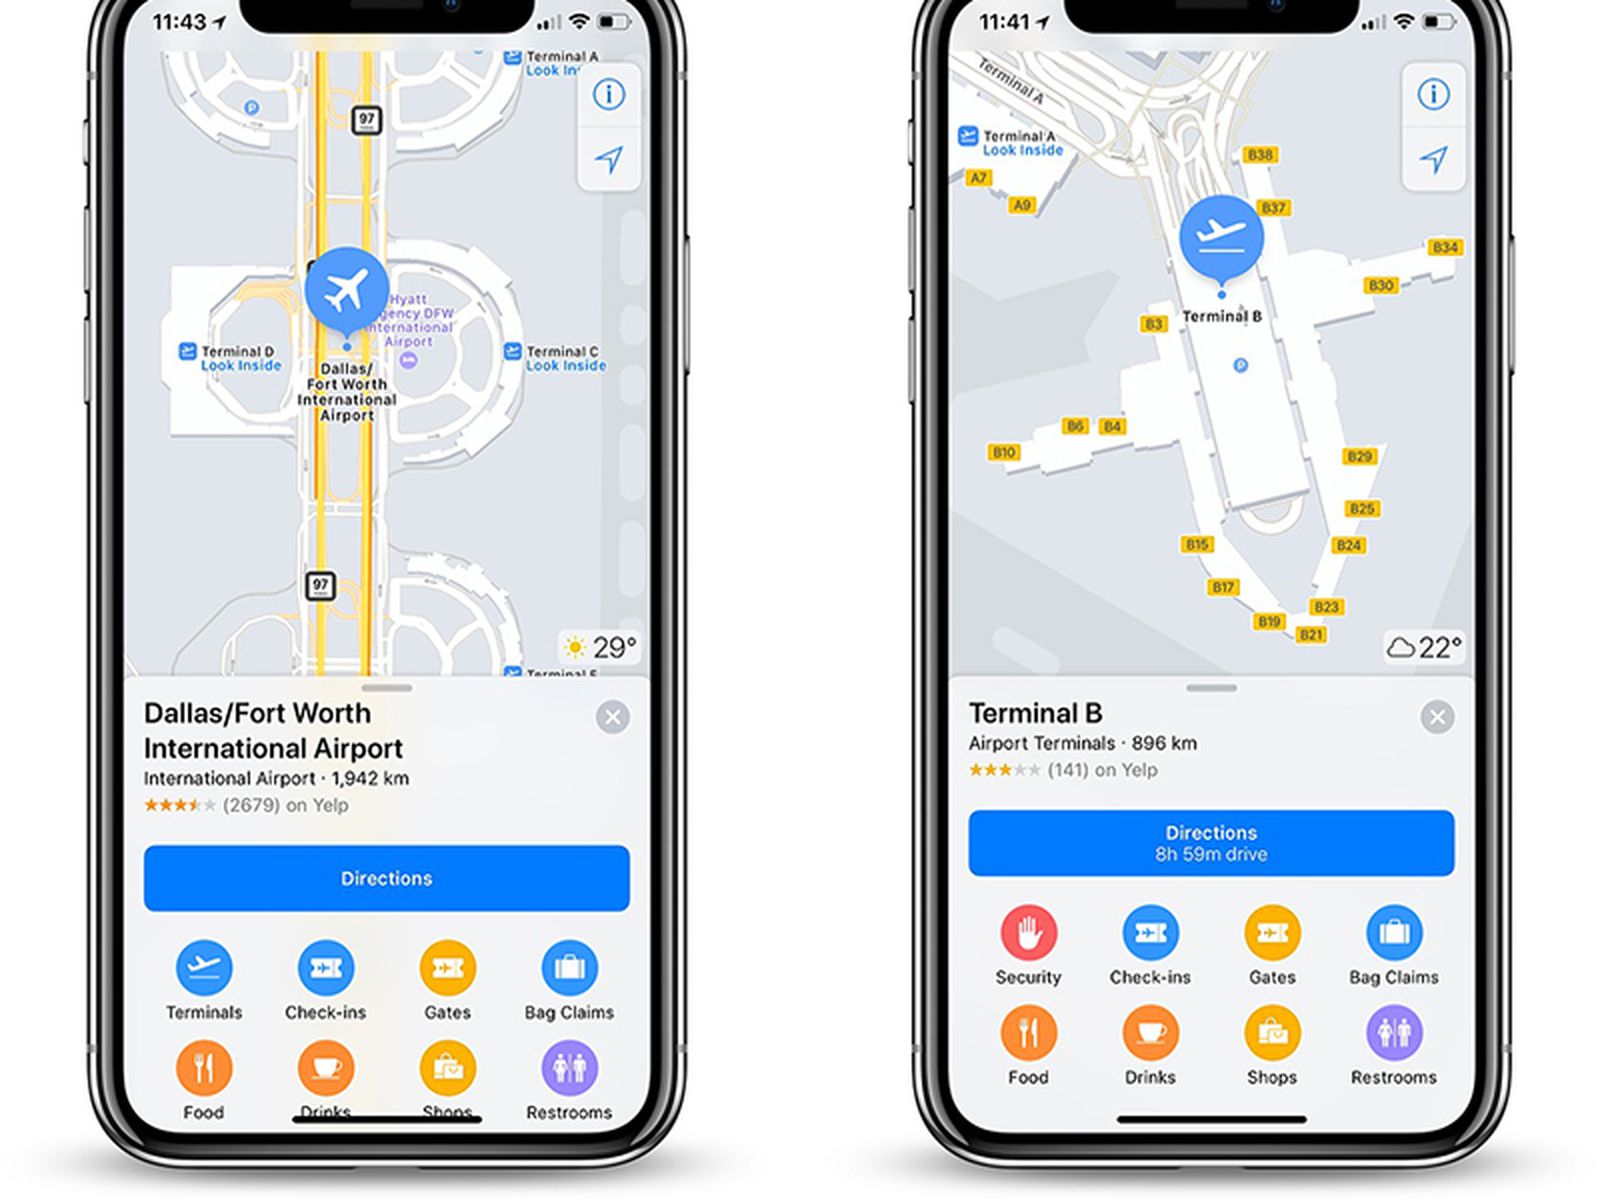 Apple Maps Gains Indoor Maps at Over 20 Additional Shopping Malls